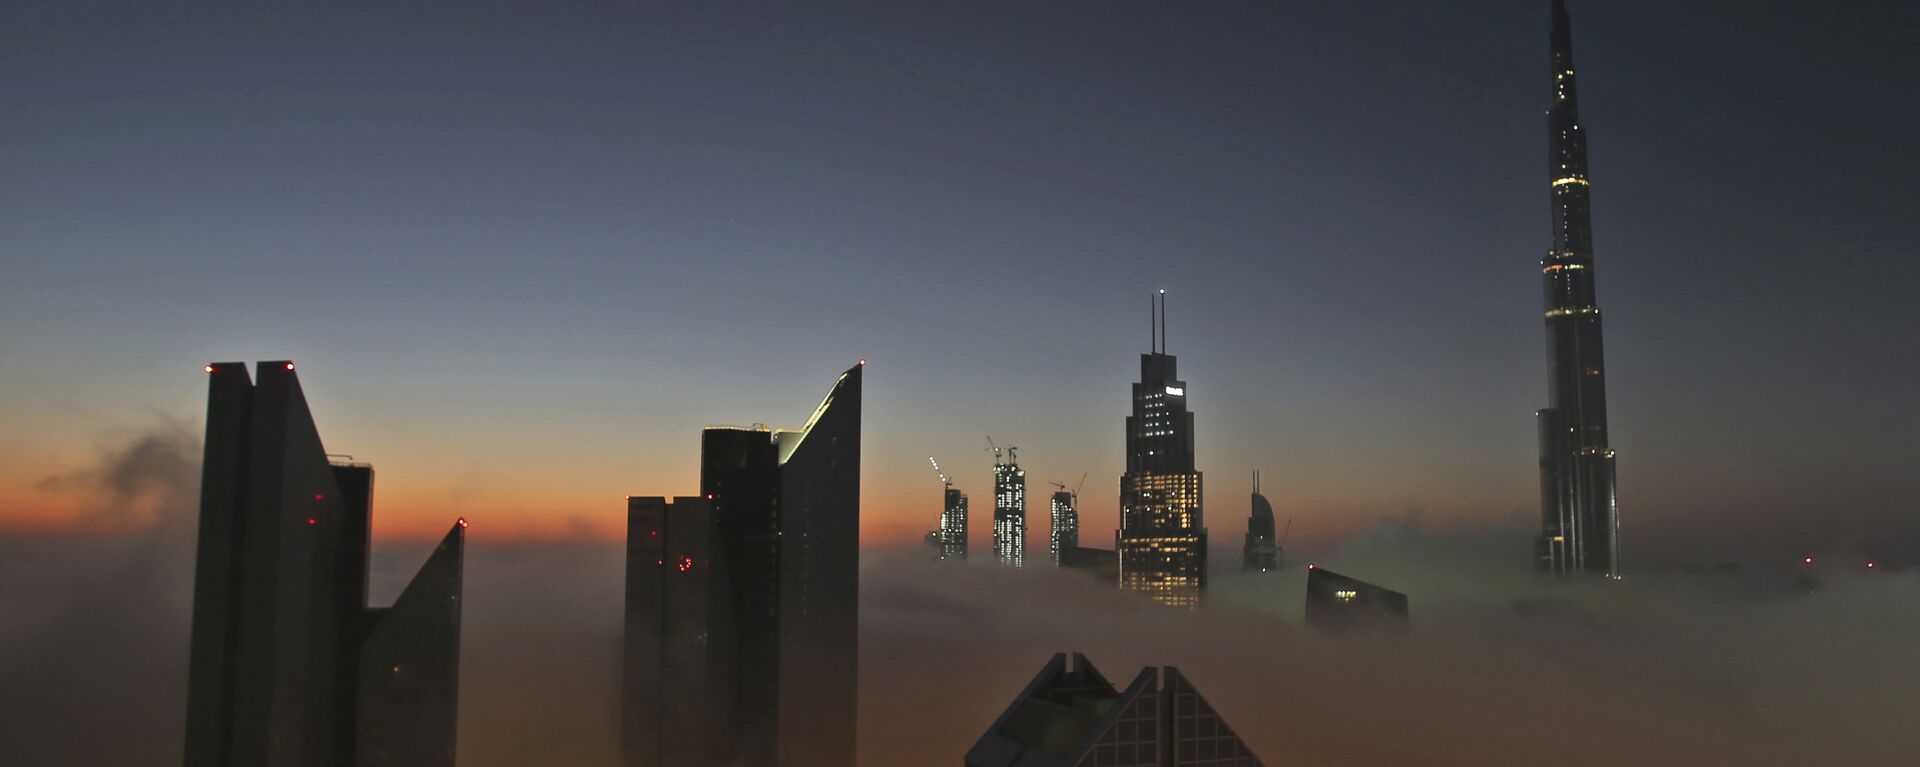 The sun rises over the city skyline with the Burj Khalifa, world's tallest building at the backdrop, seen from a balcony on the 42nd floor of a hotel on a foggy day in Dubai, United Arab Emirates, Saturday, Dec. 31, 2016 - Sputnik International, 1920, 05.08.2019